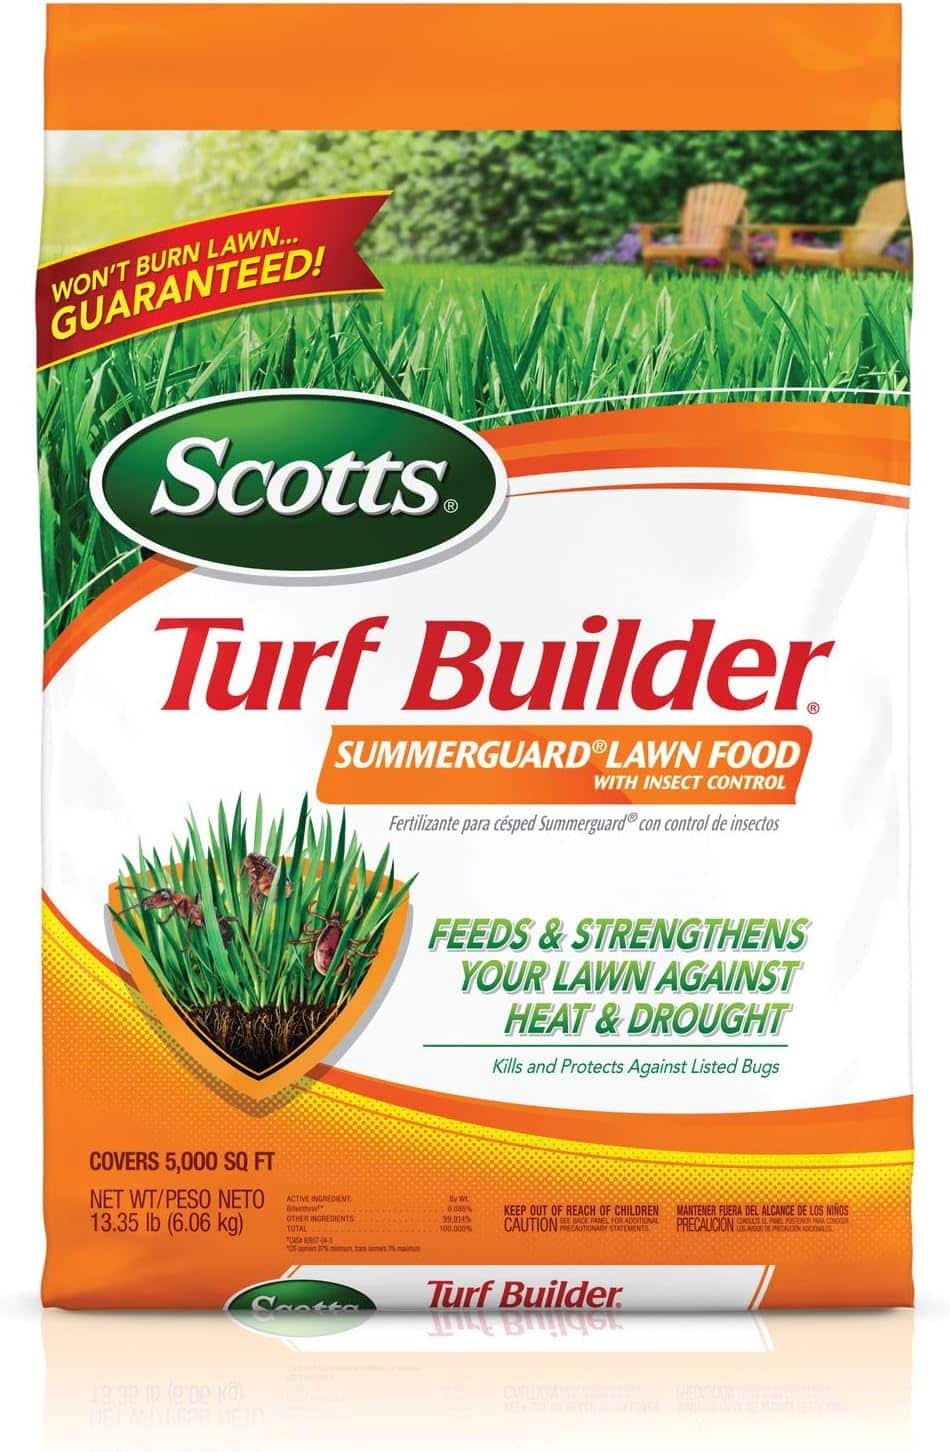 Scotts Turf Builder SummerGuard Lawn Food with Insect Control Review